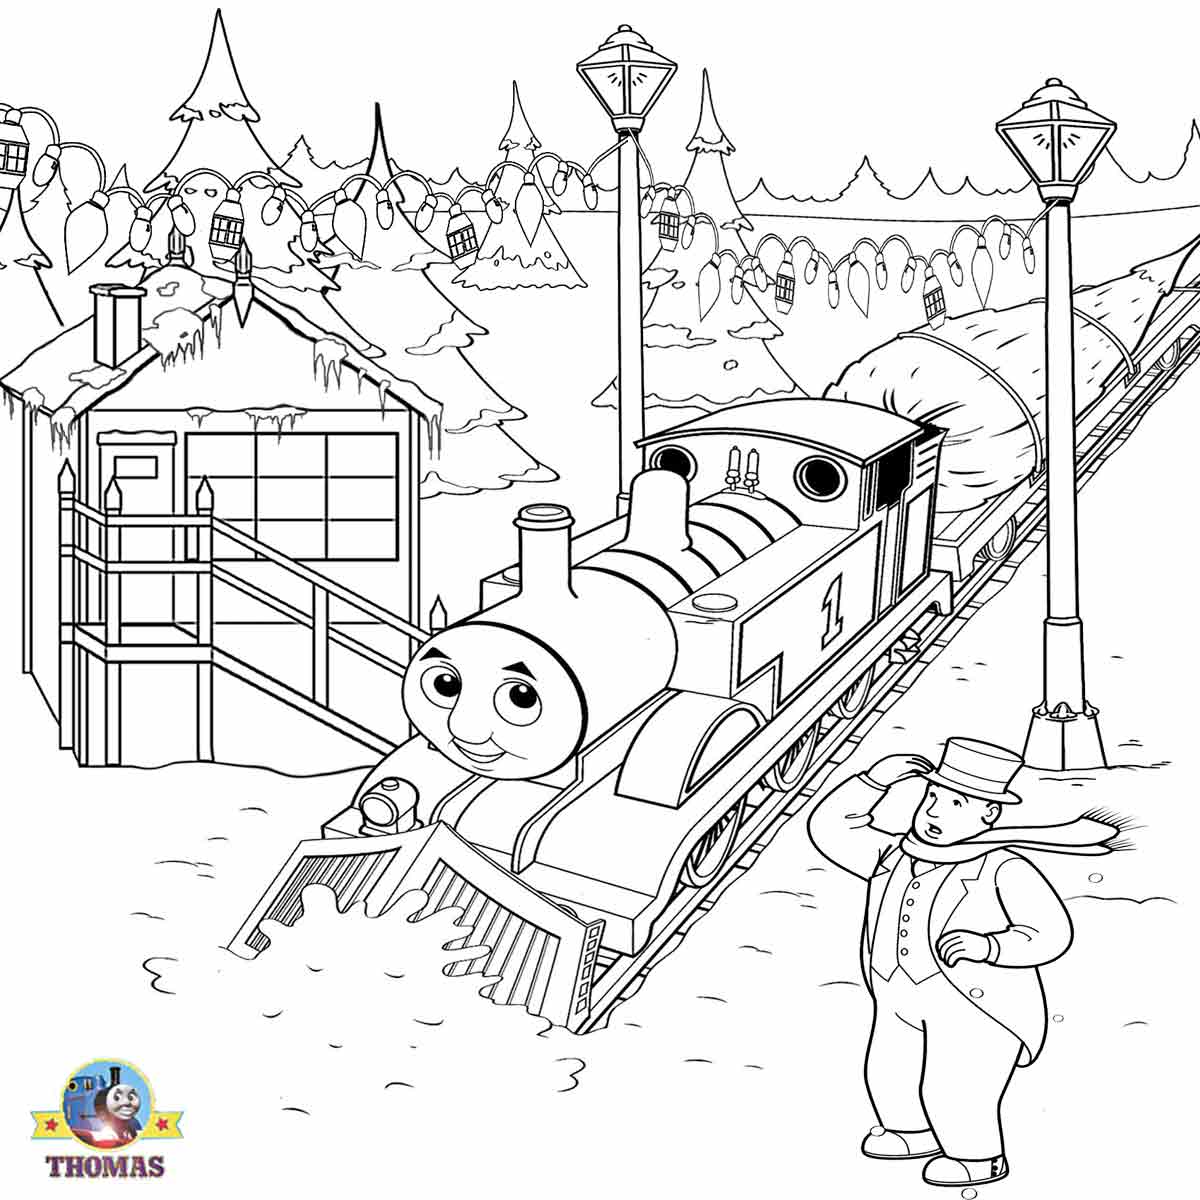 Thomas Carries a Christmas Tree Coloring Page